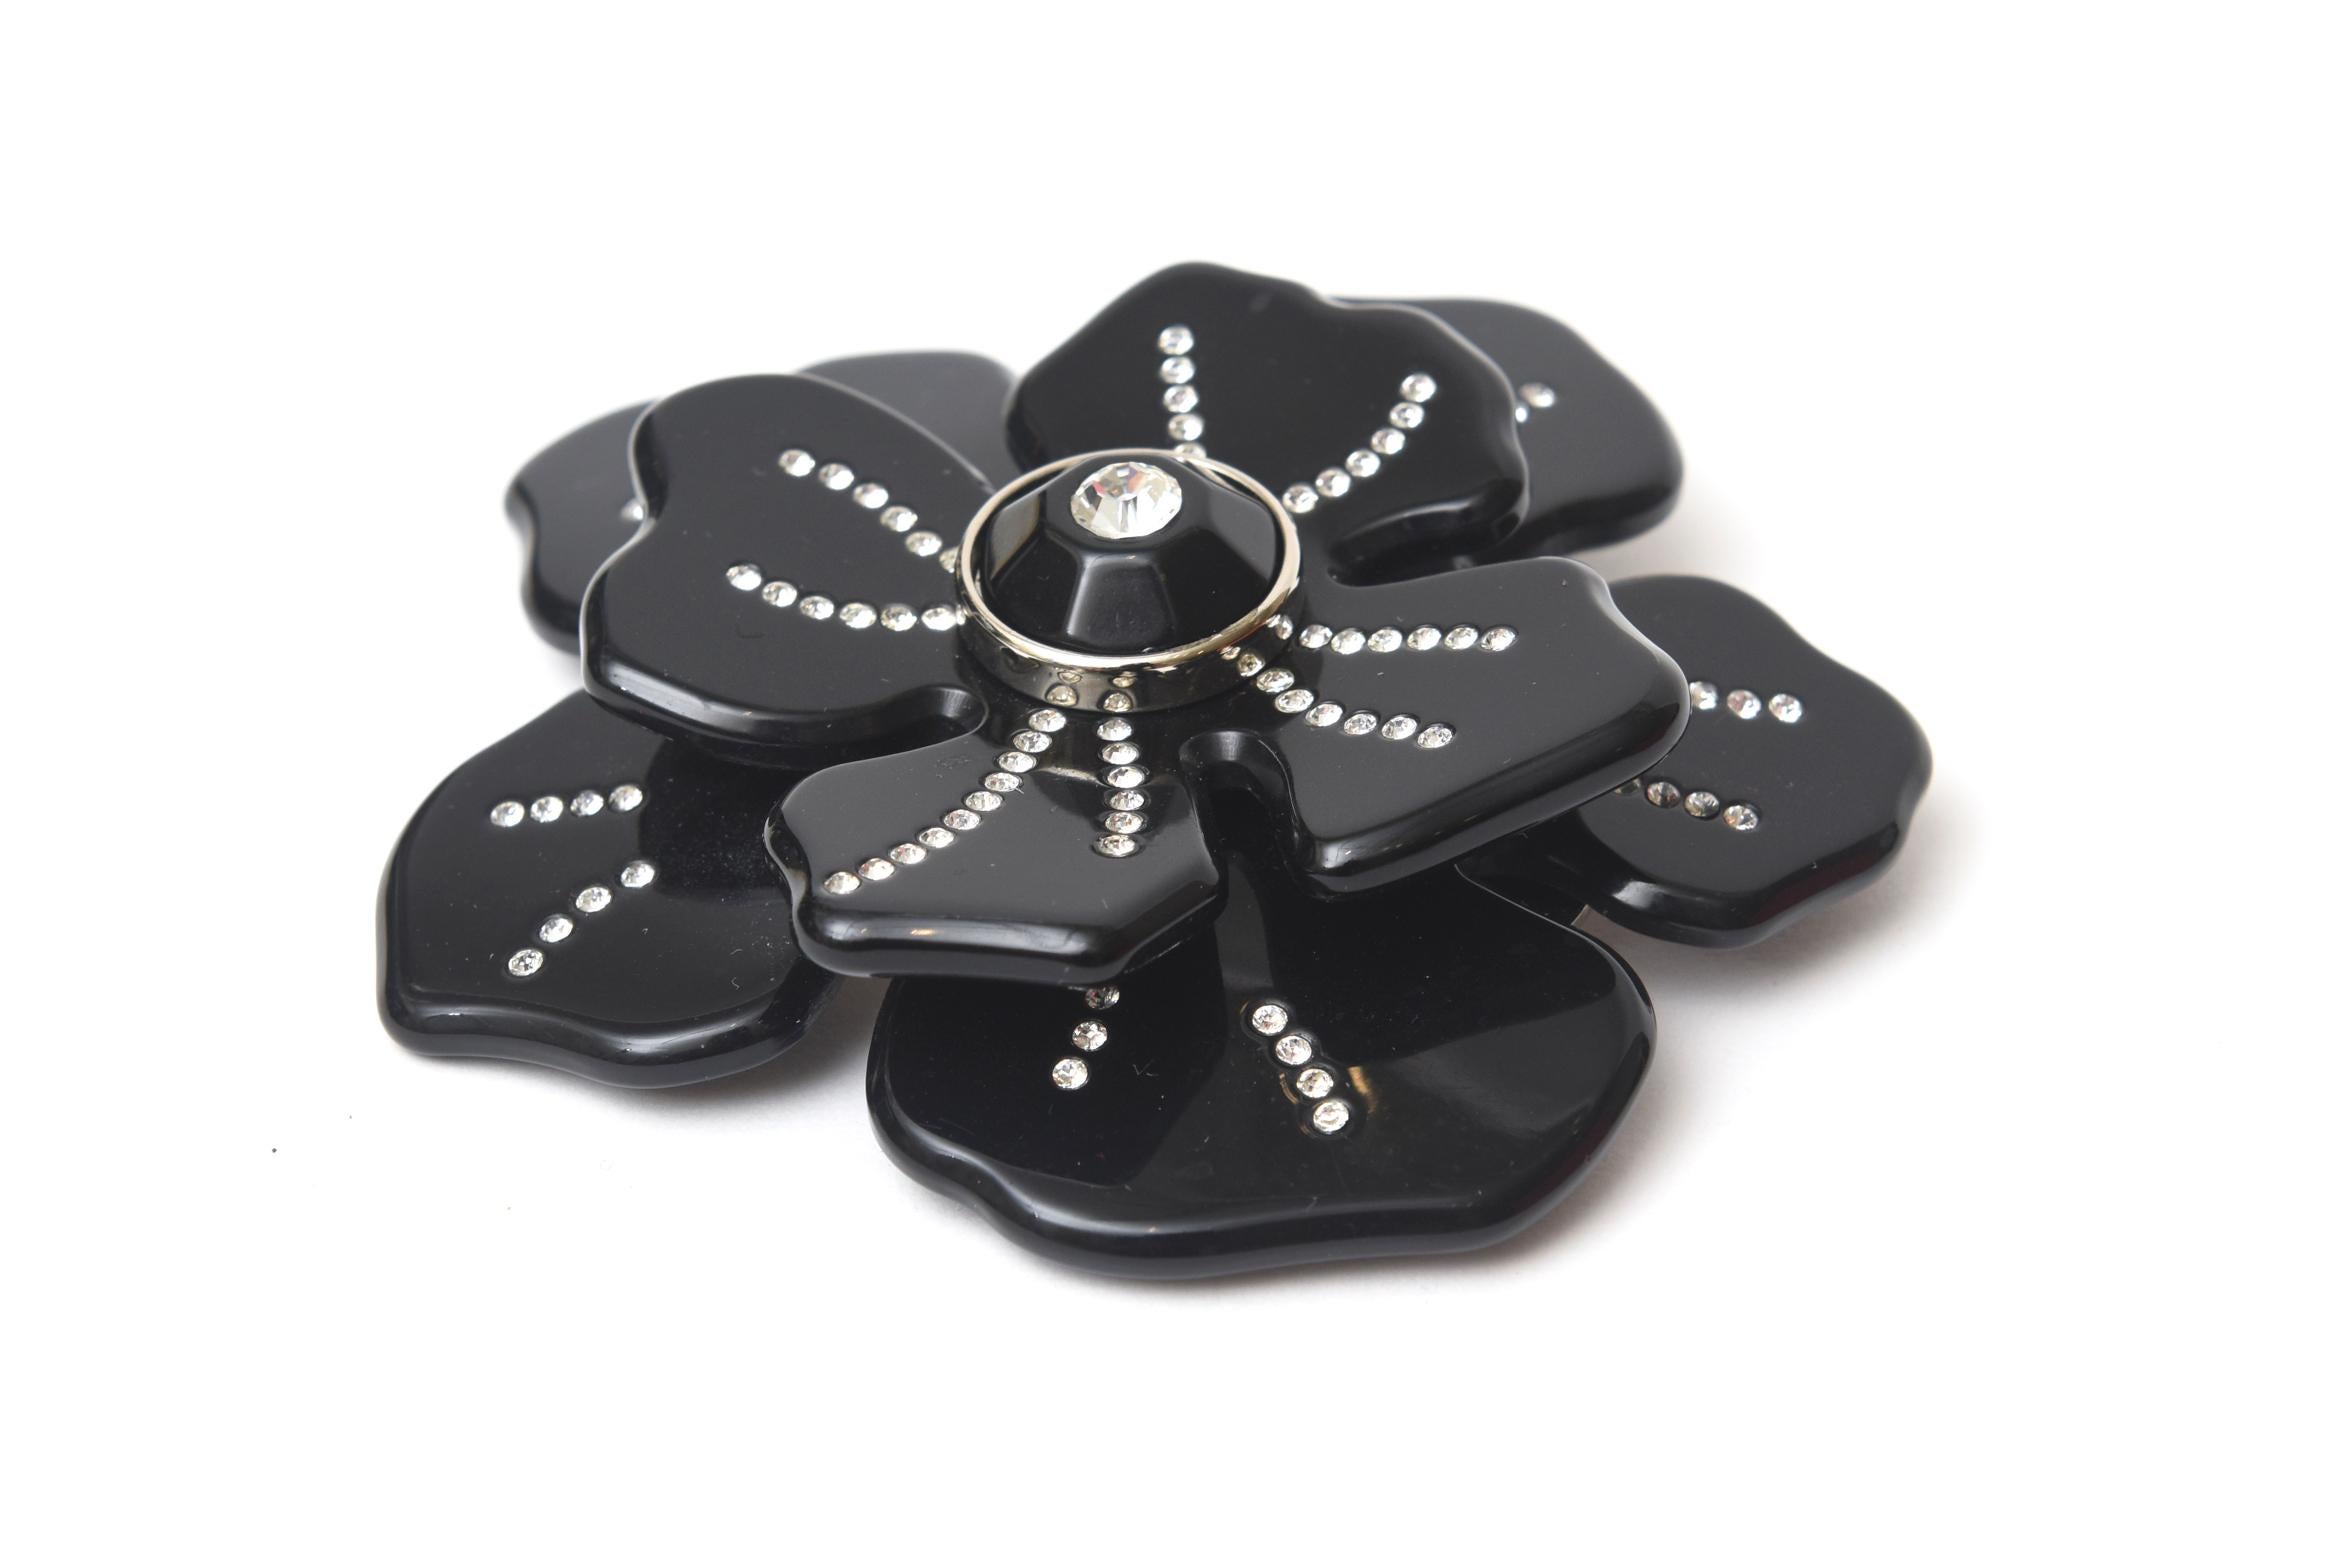 This lovely and dramatic Italian Valentino hard black resin rhinestone flower pin or brooch makes a beautiful addition to any ensemble given day or evening. It is from 2000. Very well made as any authentic Valentino piece is. It has its original